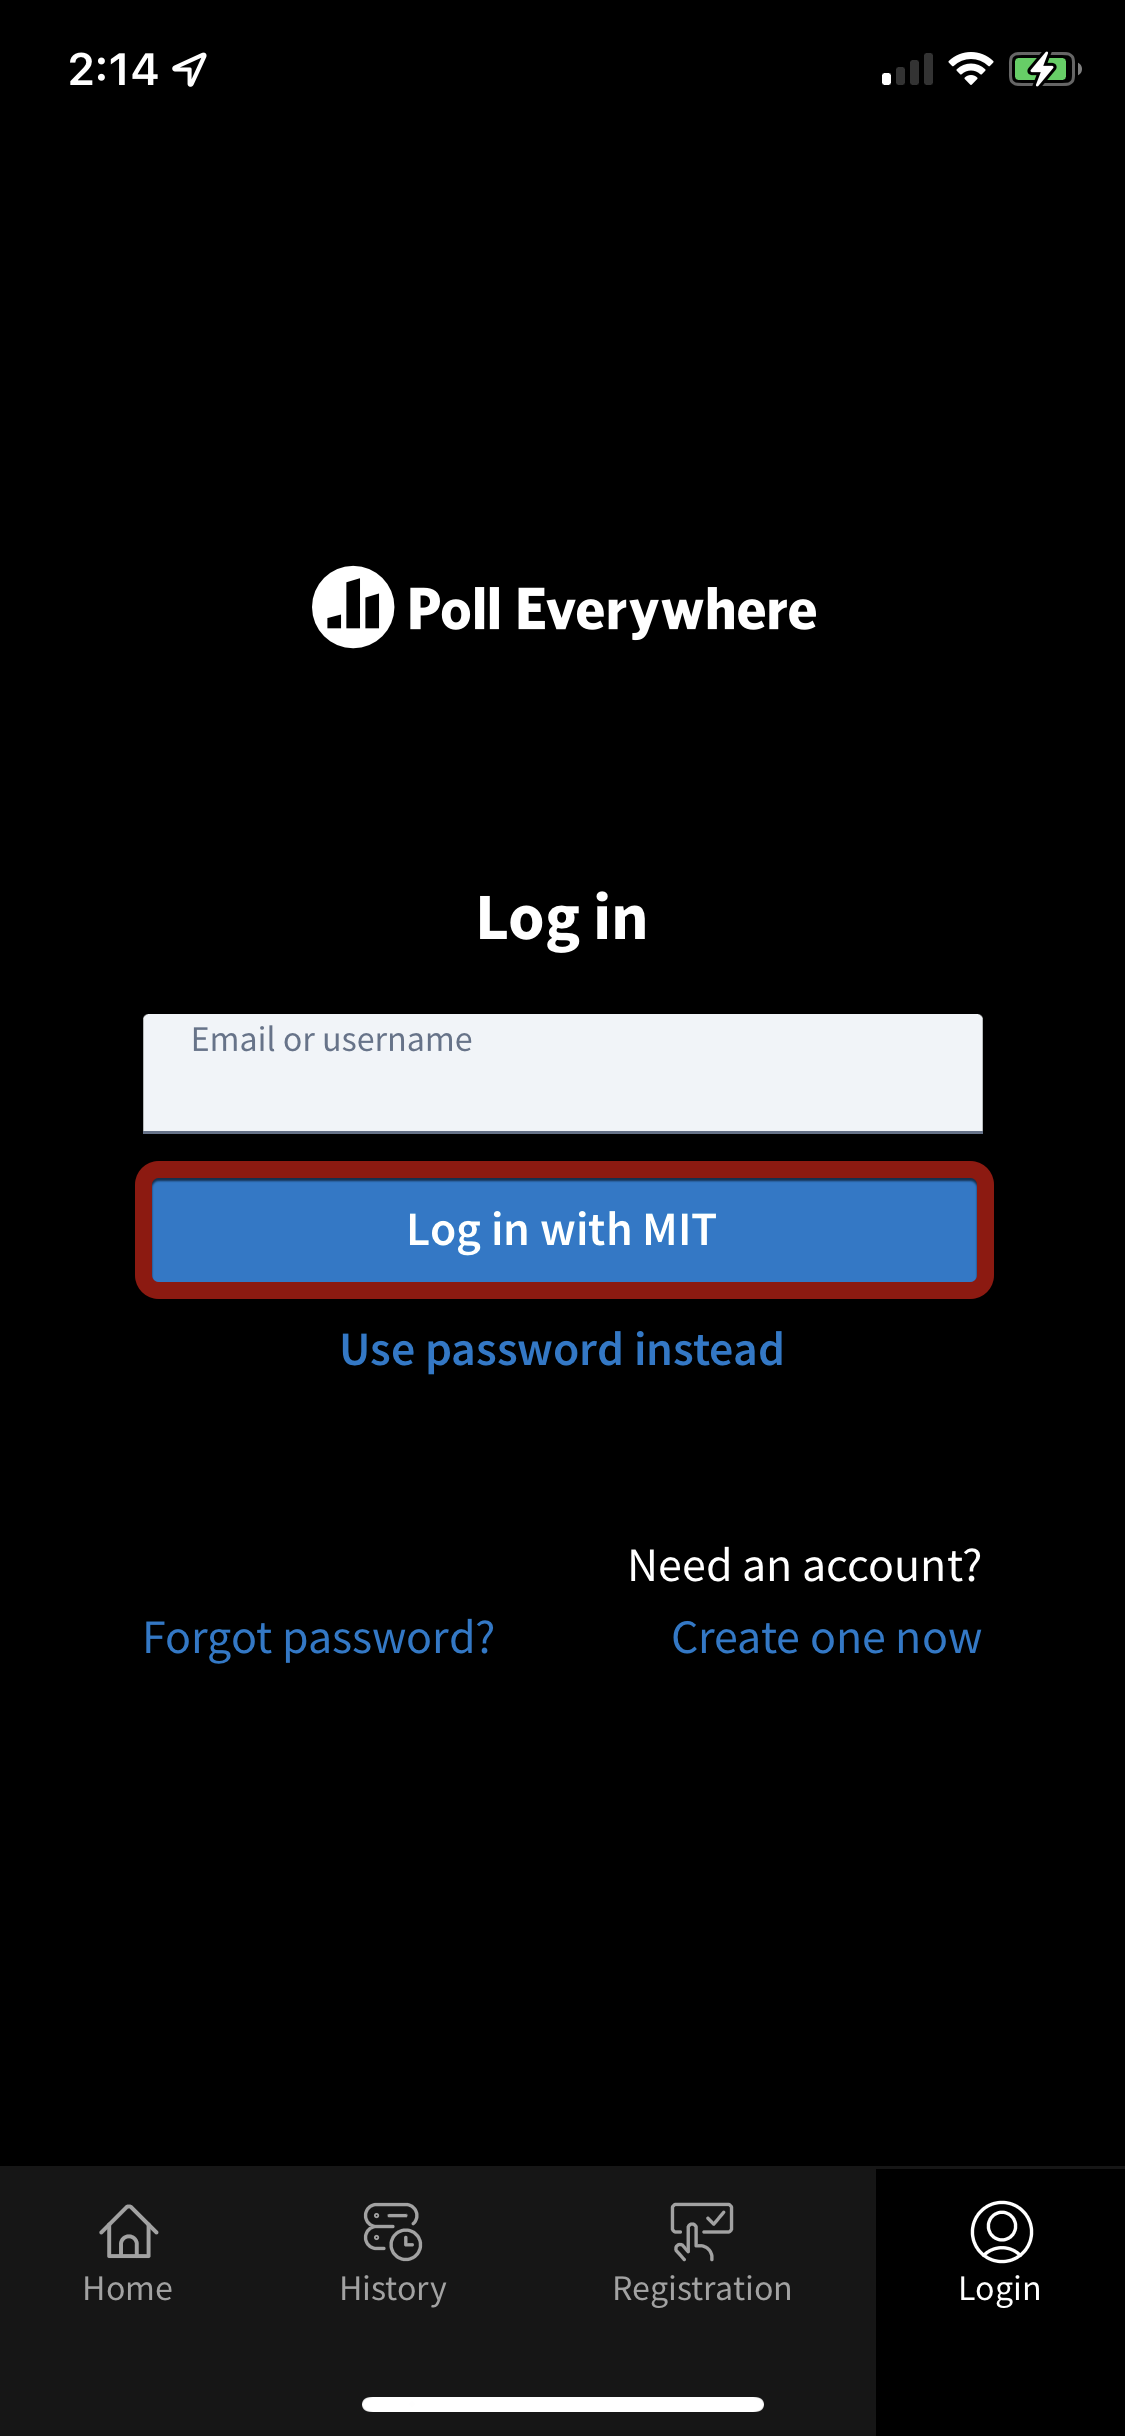 Click Log in with MIT